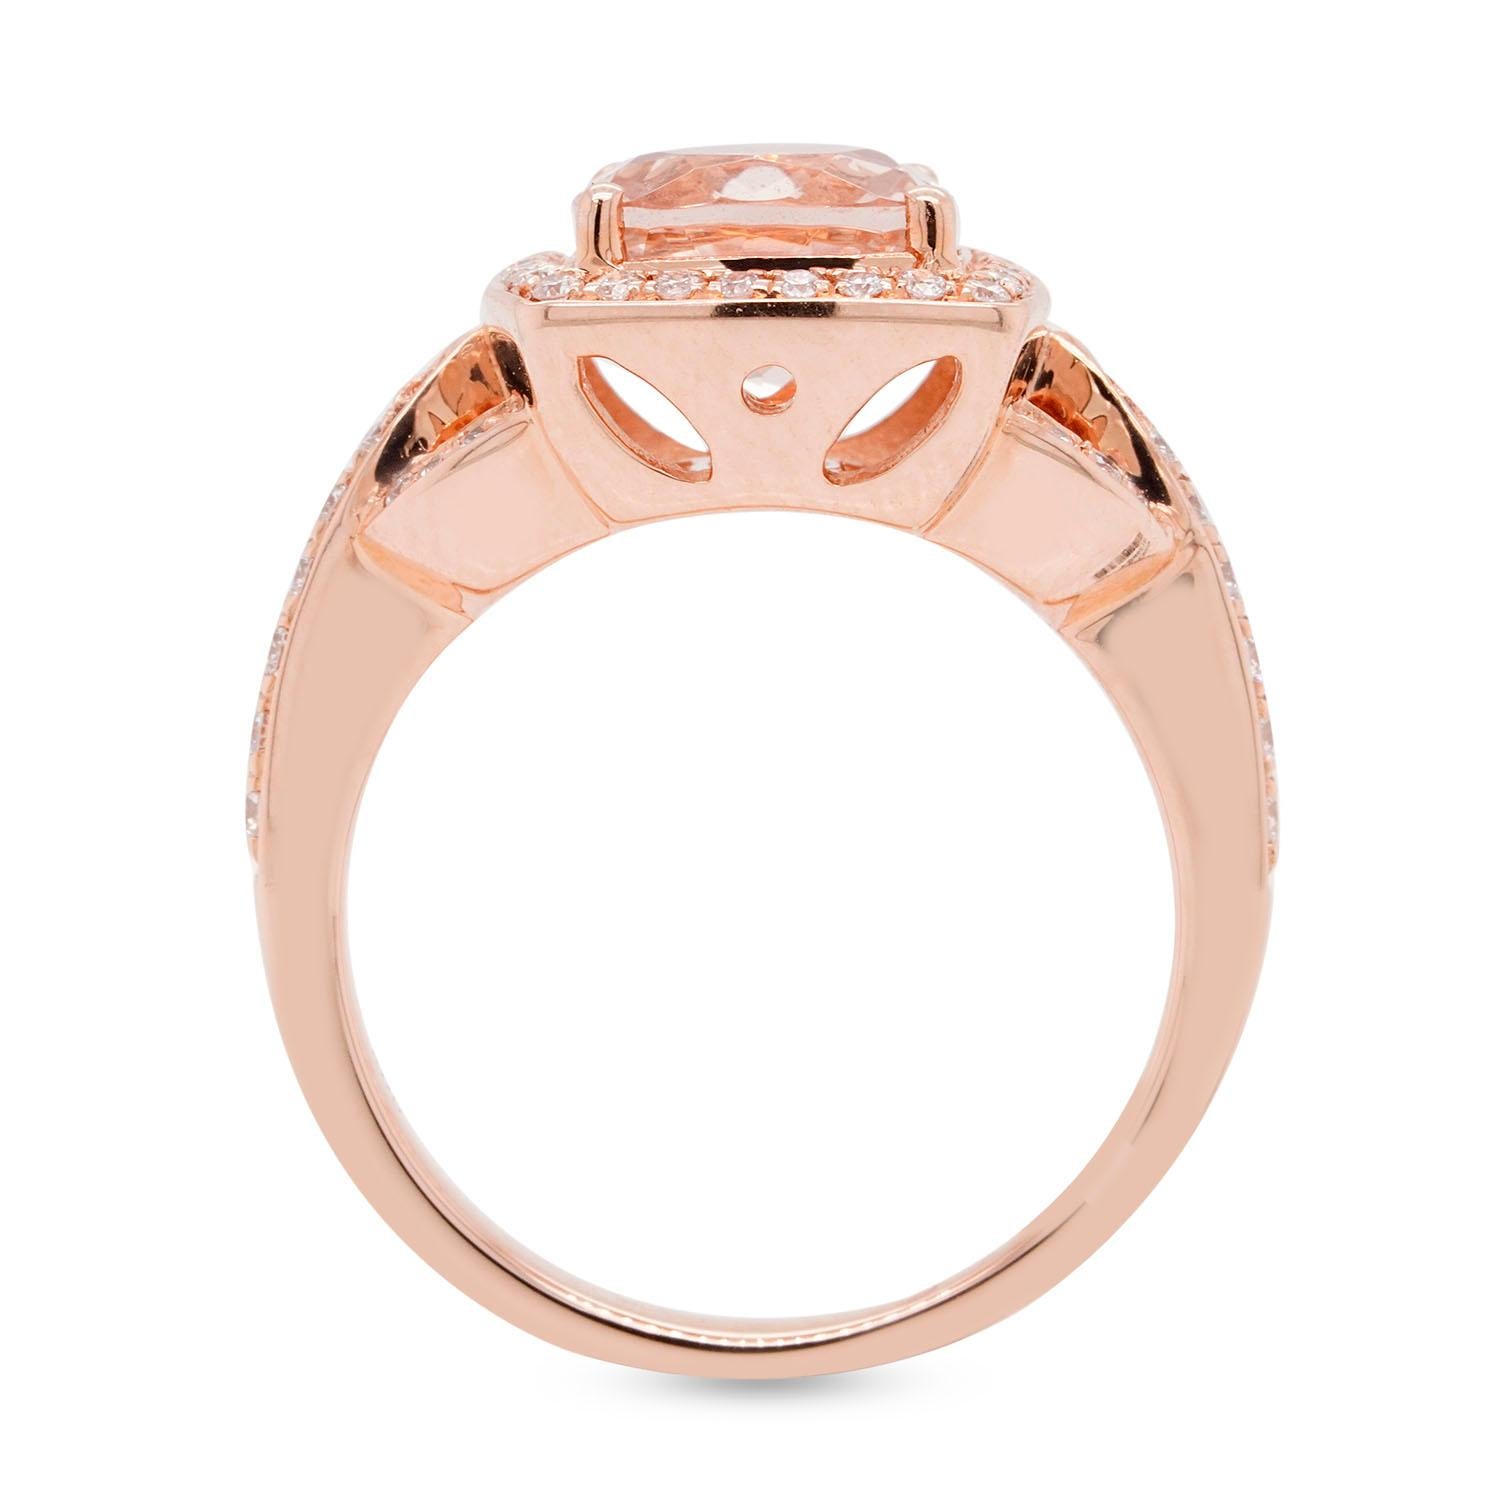 Introducing our stunning 2.07ct Morganite Cushion Shape Ring, the perfect blend of elegance and sophistication. This beautiful ring features a cushion-shaped morganite gemstone that's the centerpiece of the design, surrounded by a halo of sparkling